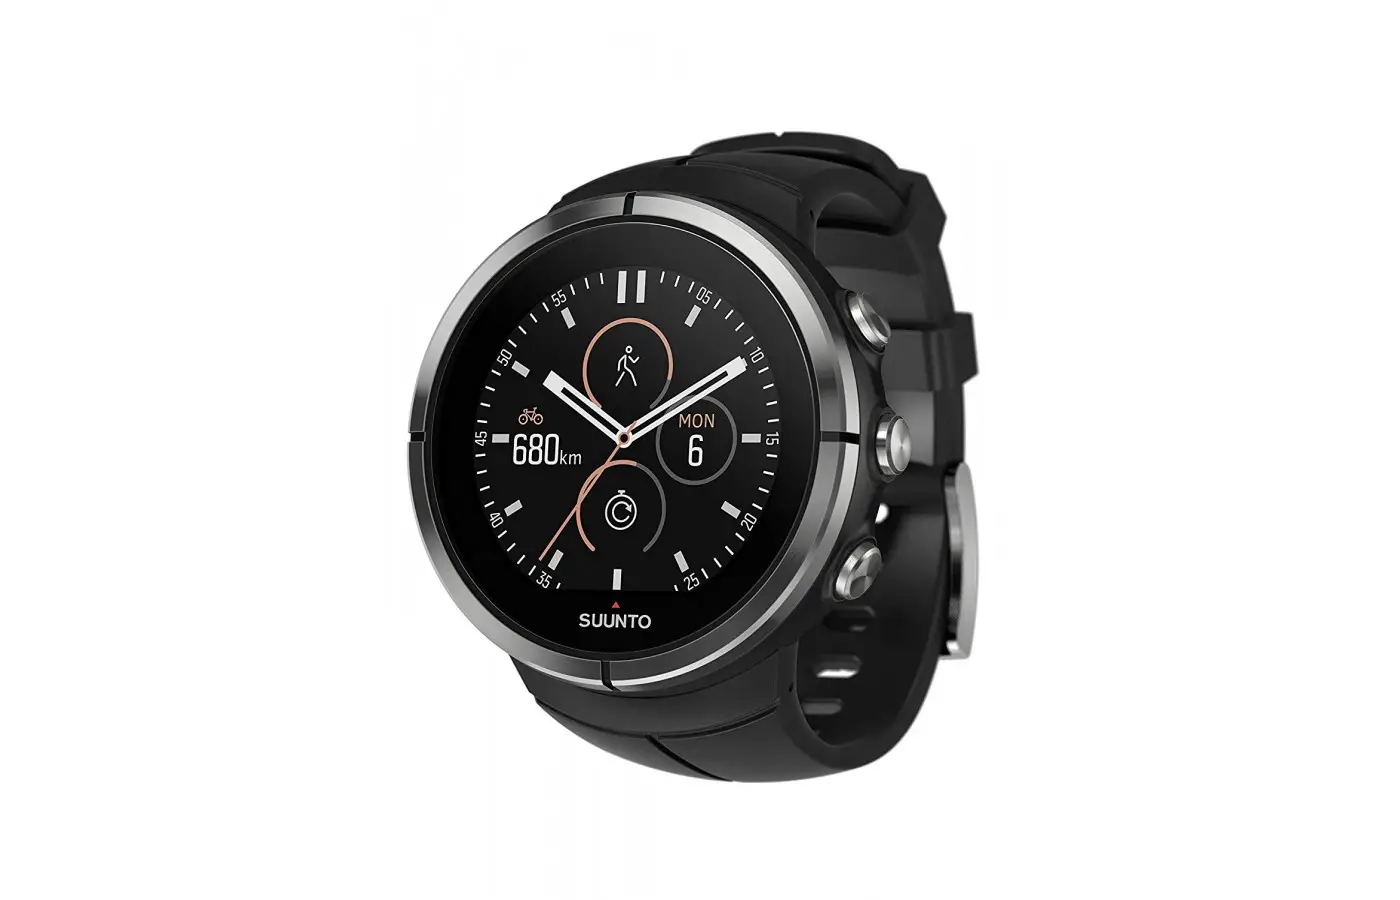 The watch is water resistant up to 100 meters.